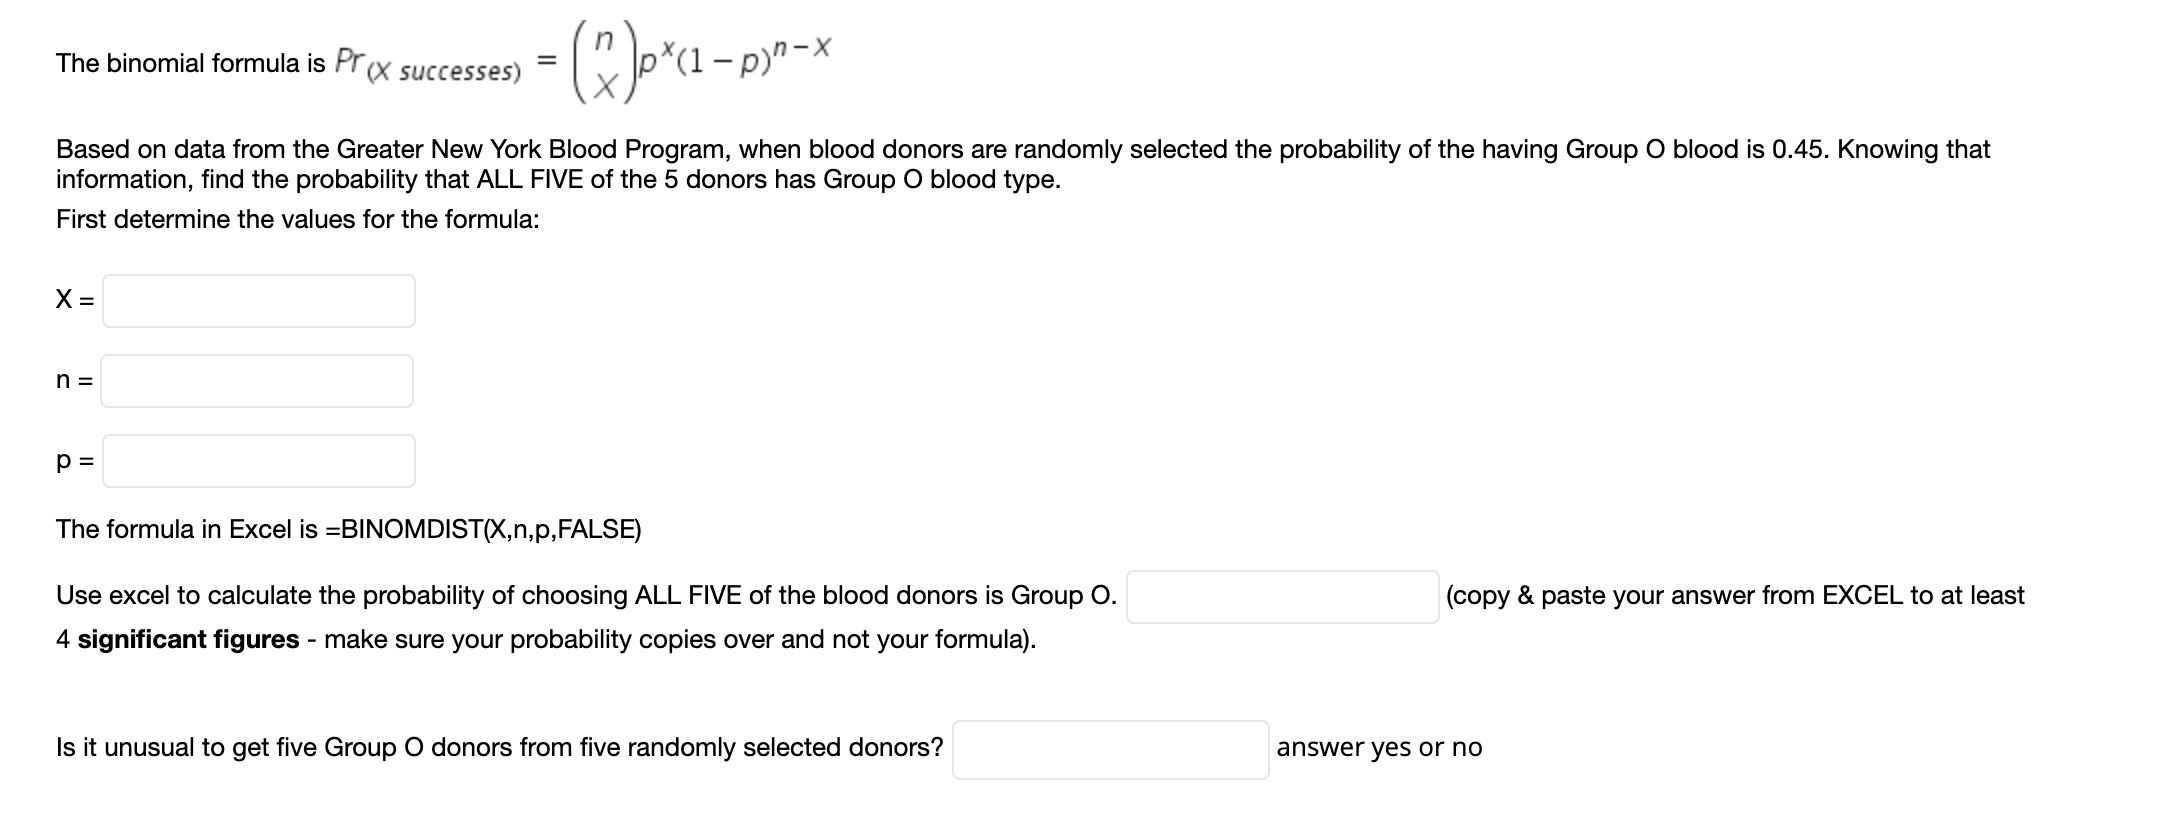 Op*a-p-*
The binomial formula is Pr(X successes)
Based on data from the Greater New York Blood Program, when blood donors are randomly selected the probability of the having Group O blood is 0.45. Knowing that
information, find the probability that ALL FIVE of the 5 donors has Group O blood type.
First determine the values for the formula:
The formula in Excel is =BINOMDIST(X,n,p,FALSE)
Use excel to calculate the probability of choosing ALL FIVE of the blood donors is Group O.
4 significant figures - make sure your probability copies over and not your formula).
(copy & paste your answer from EXCEL to at least
Is it unusual to get five Group O donors from five randomly selected donors?
answer yes or no
